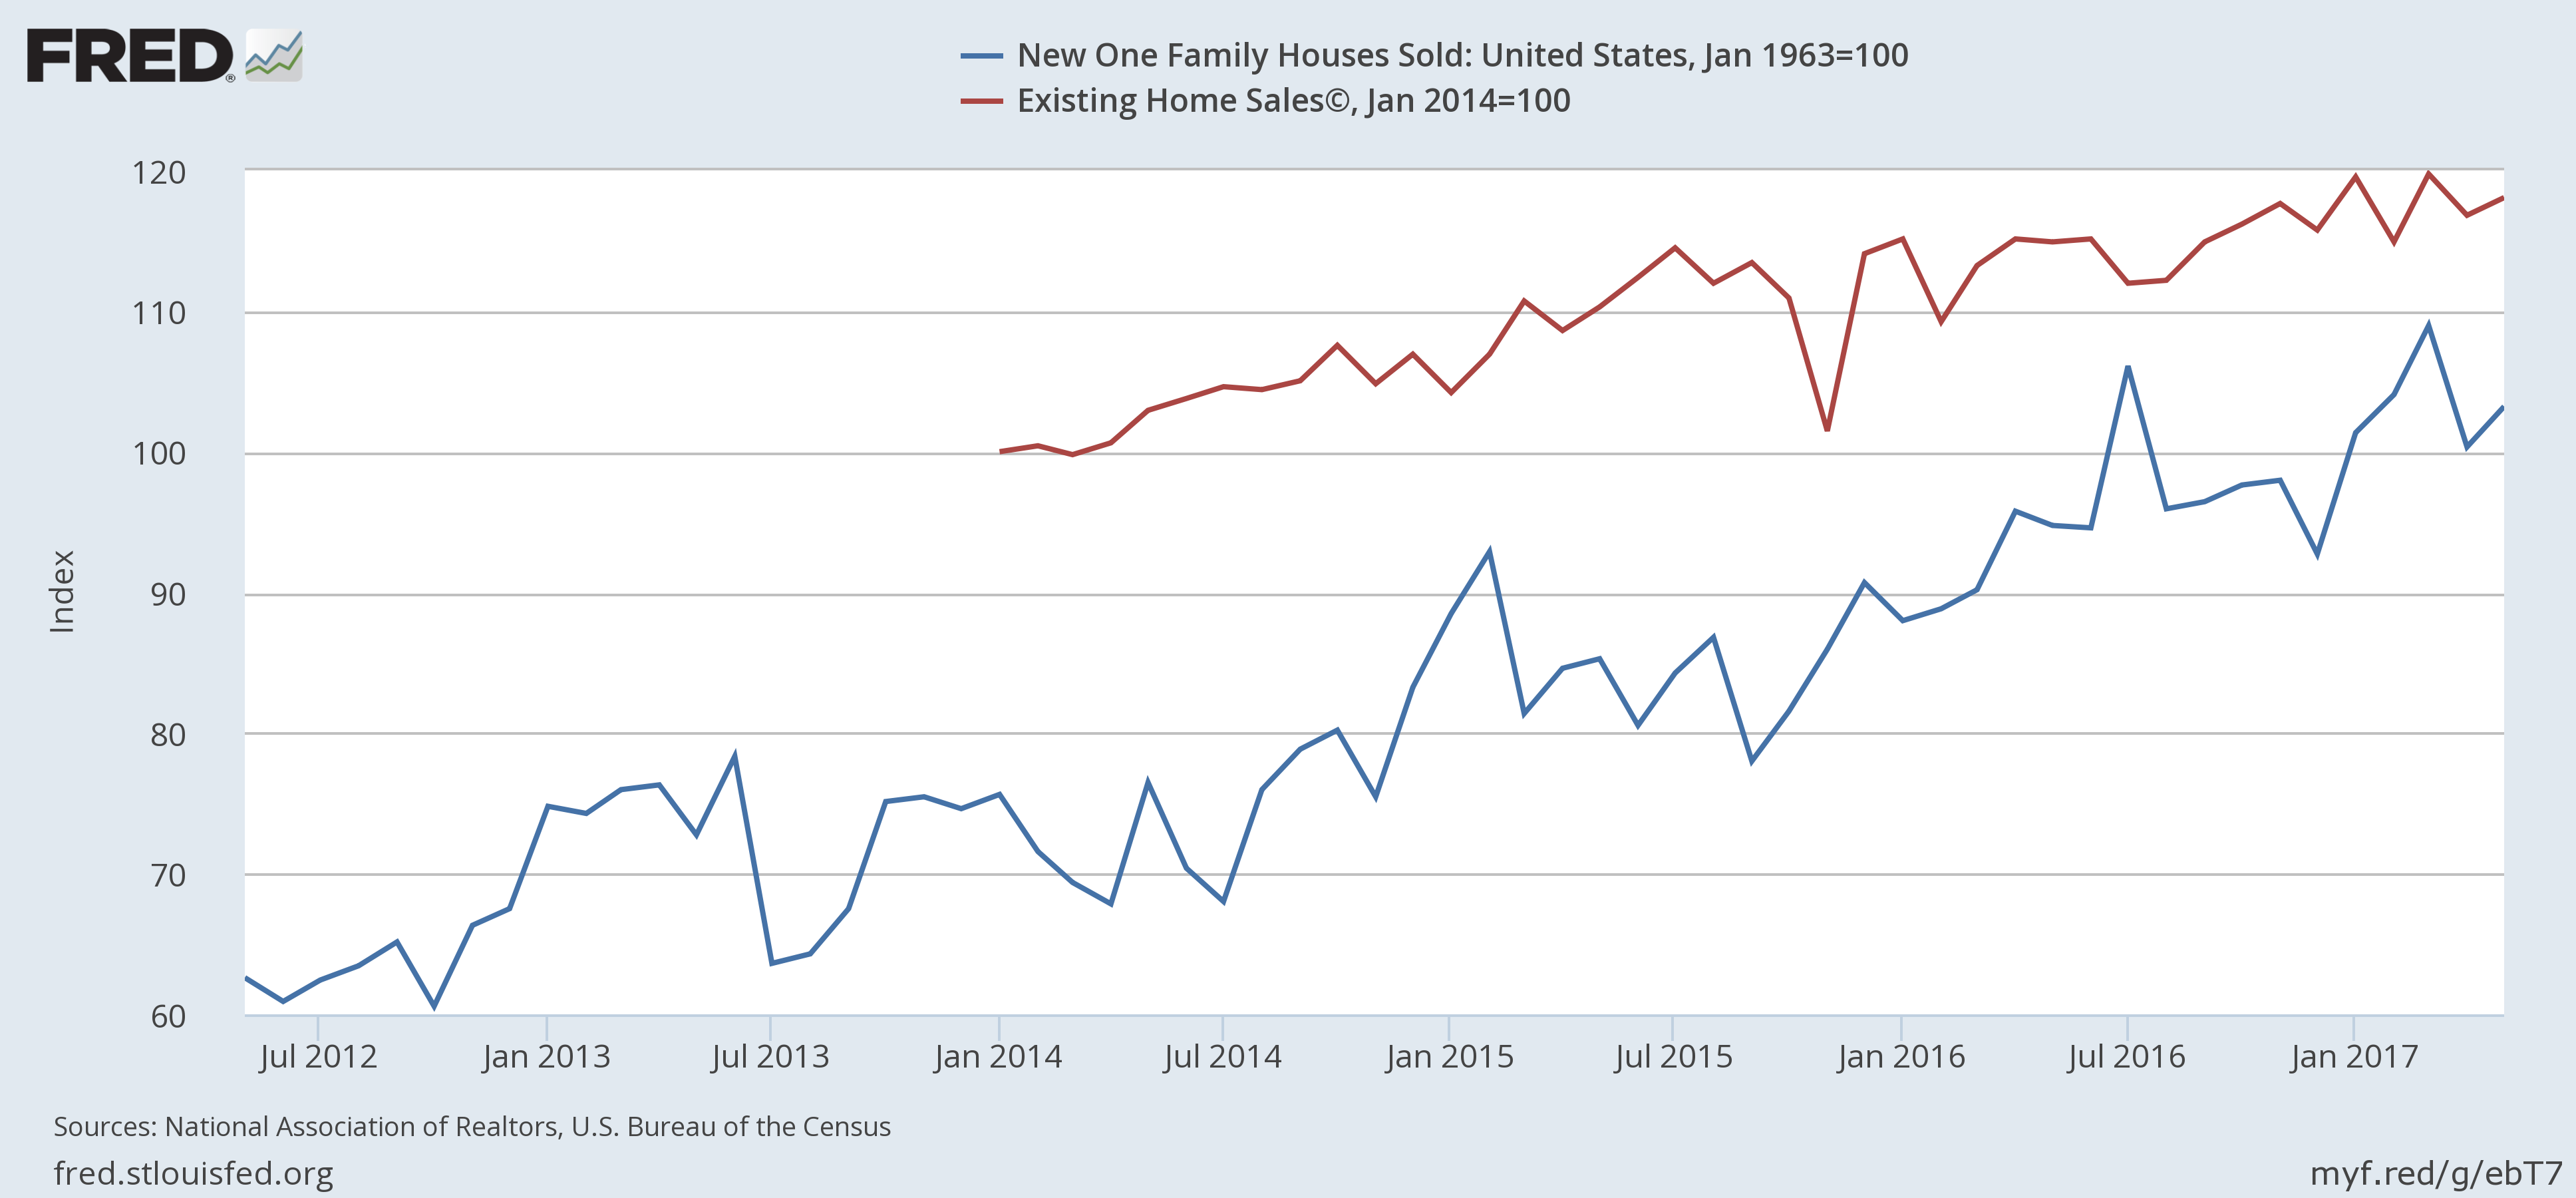 New one family houses sold vs existing home sales